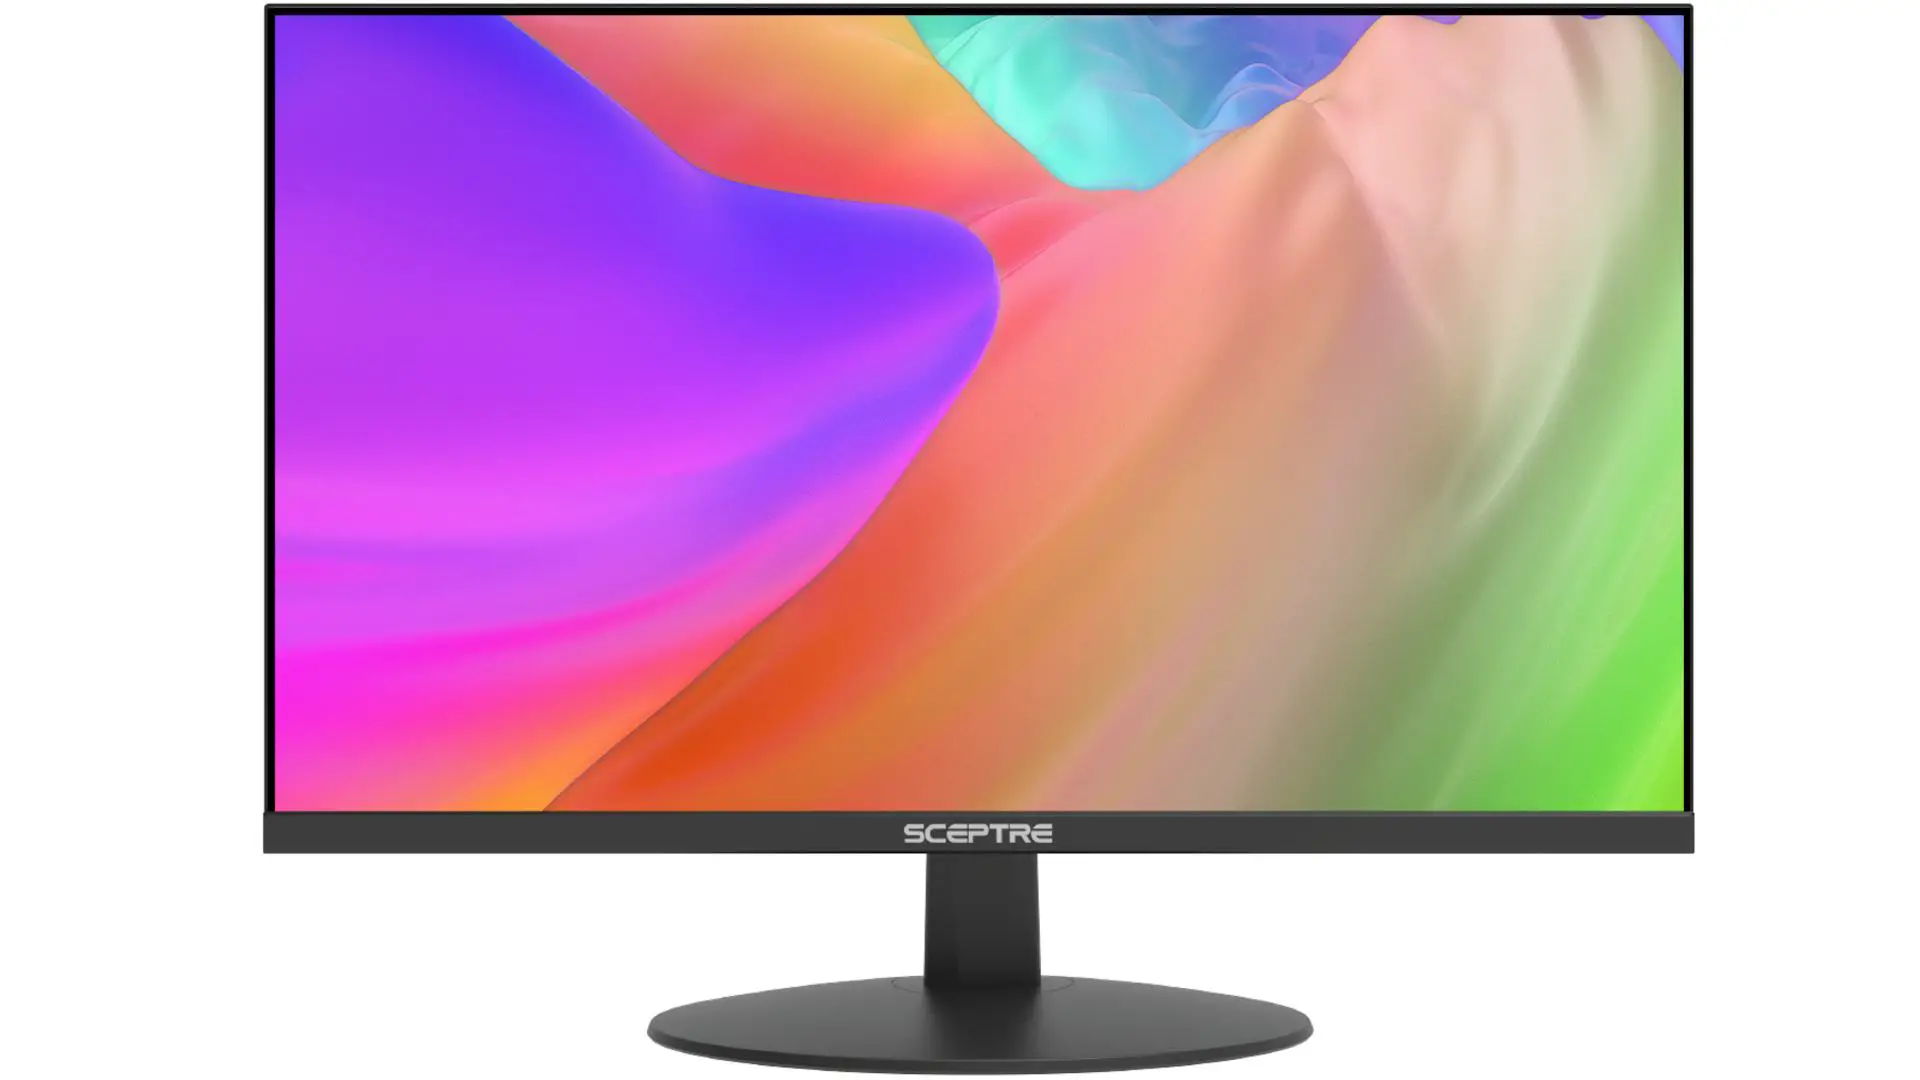 Read more about the article Sceptre 24-inch E249W-FPT Monitor Review